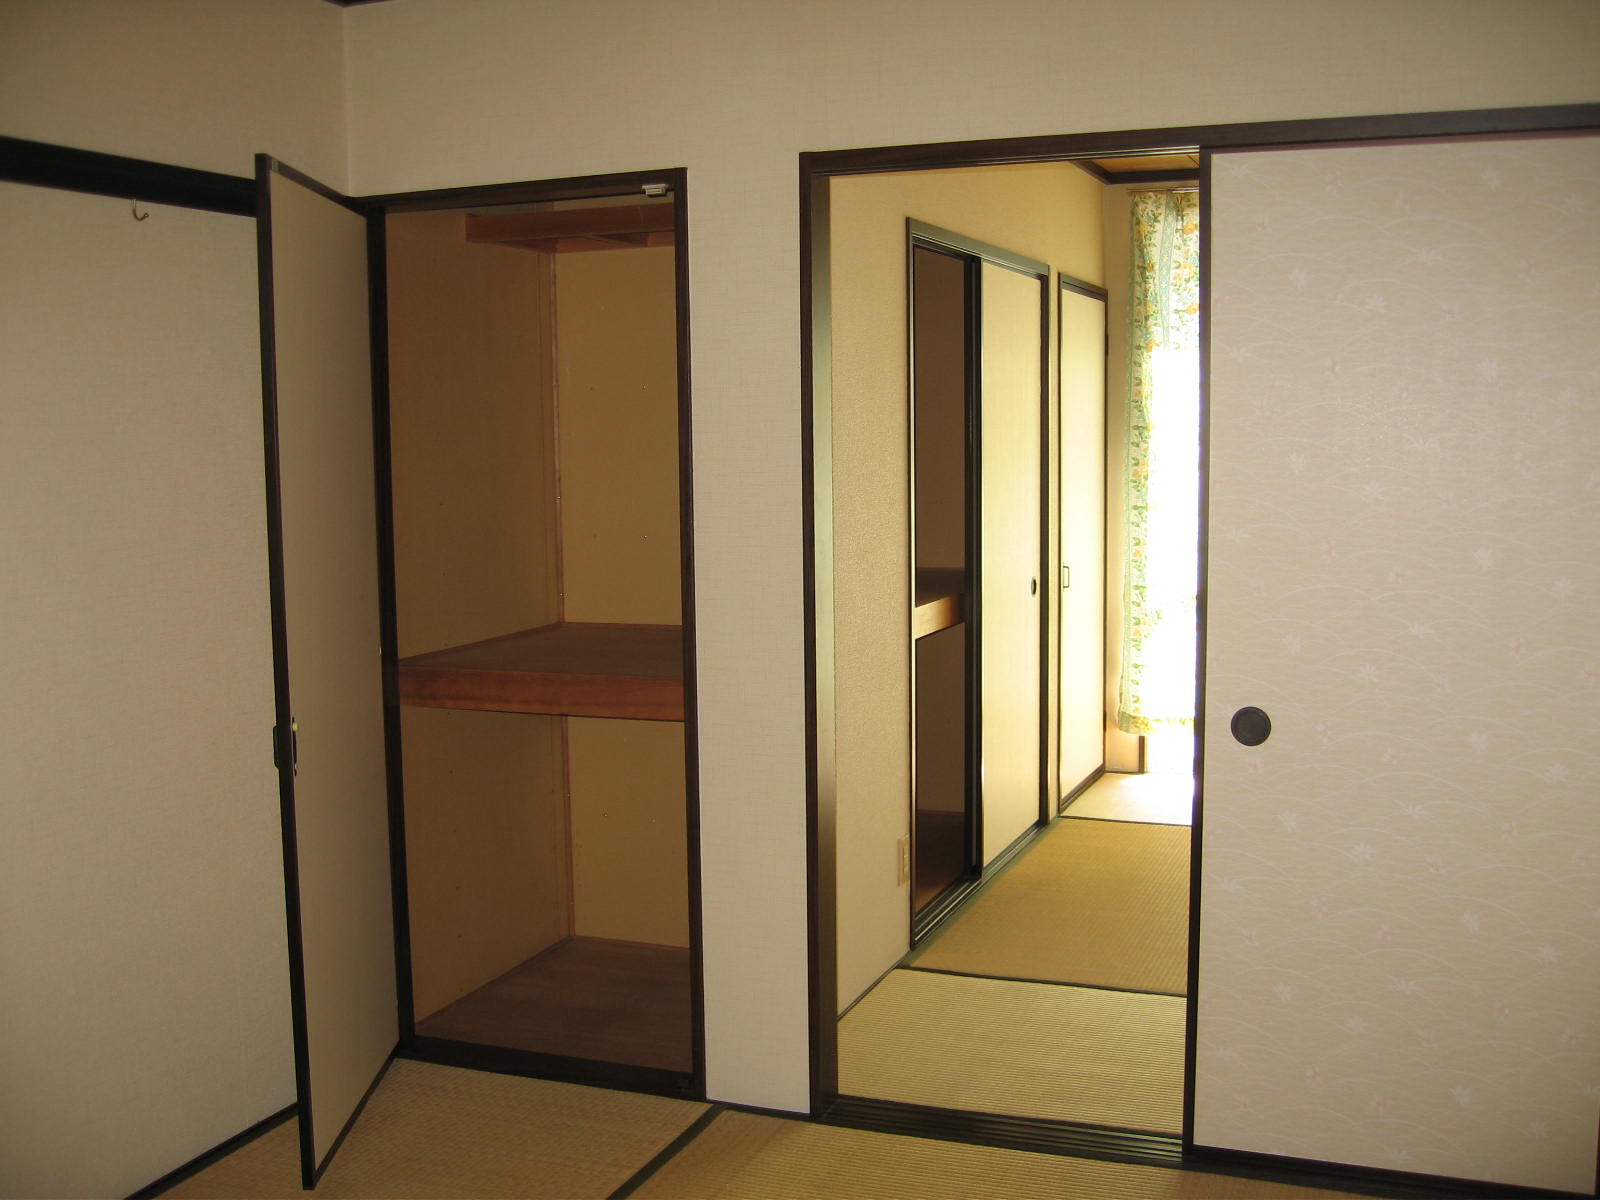 Other room space. From the north Japanese-style room